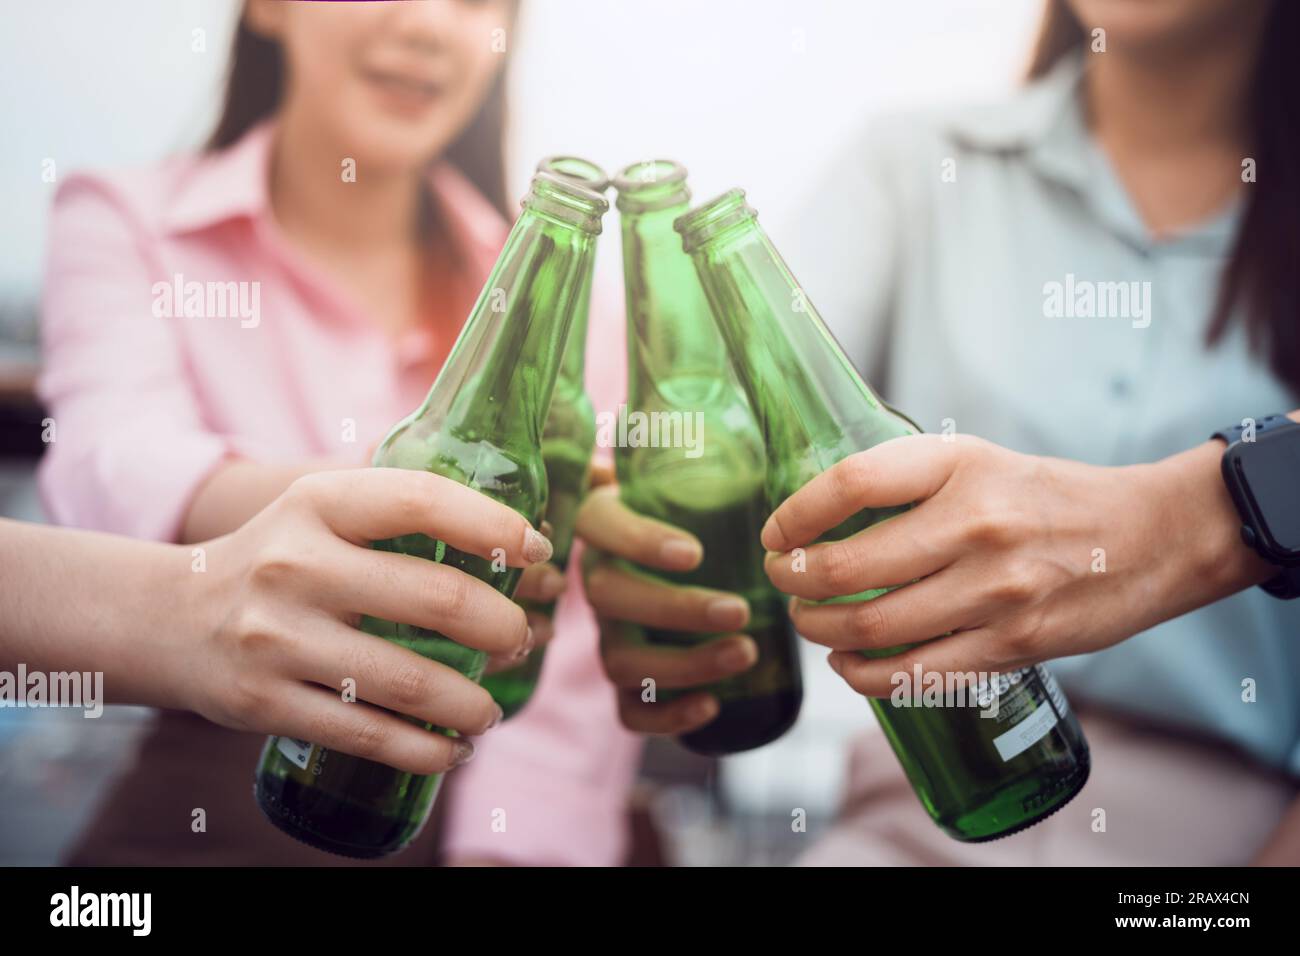 Hands of young woman clinking bottles while drinking beer together. Stock Photo